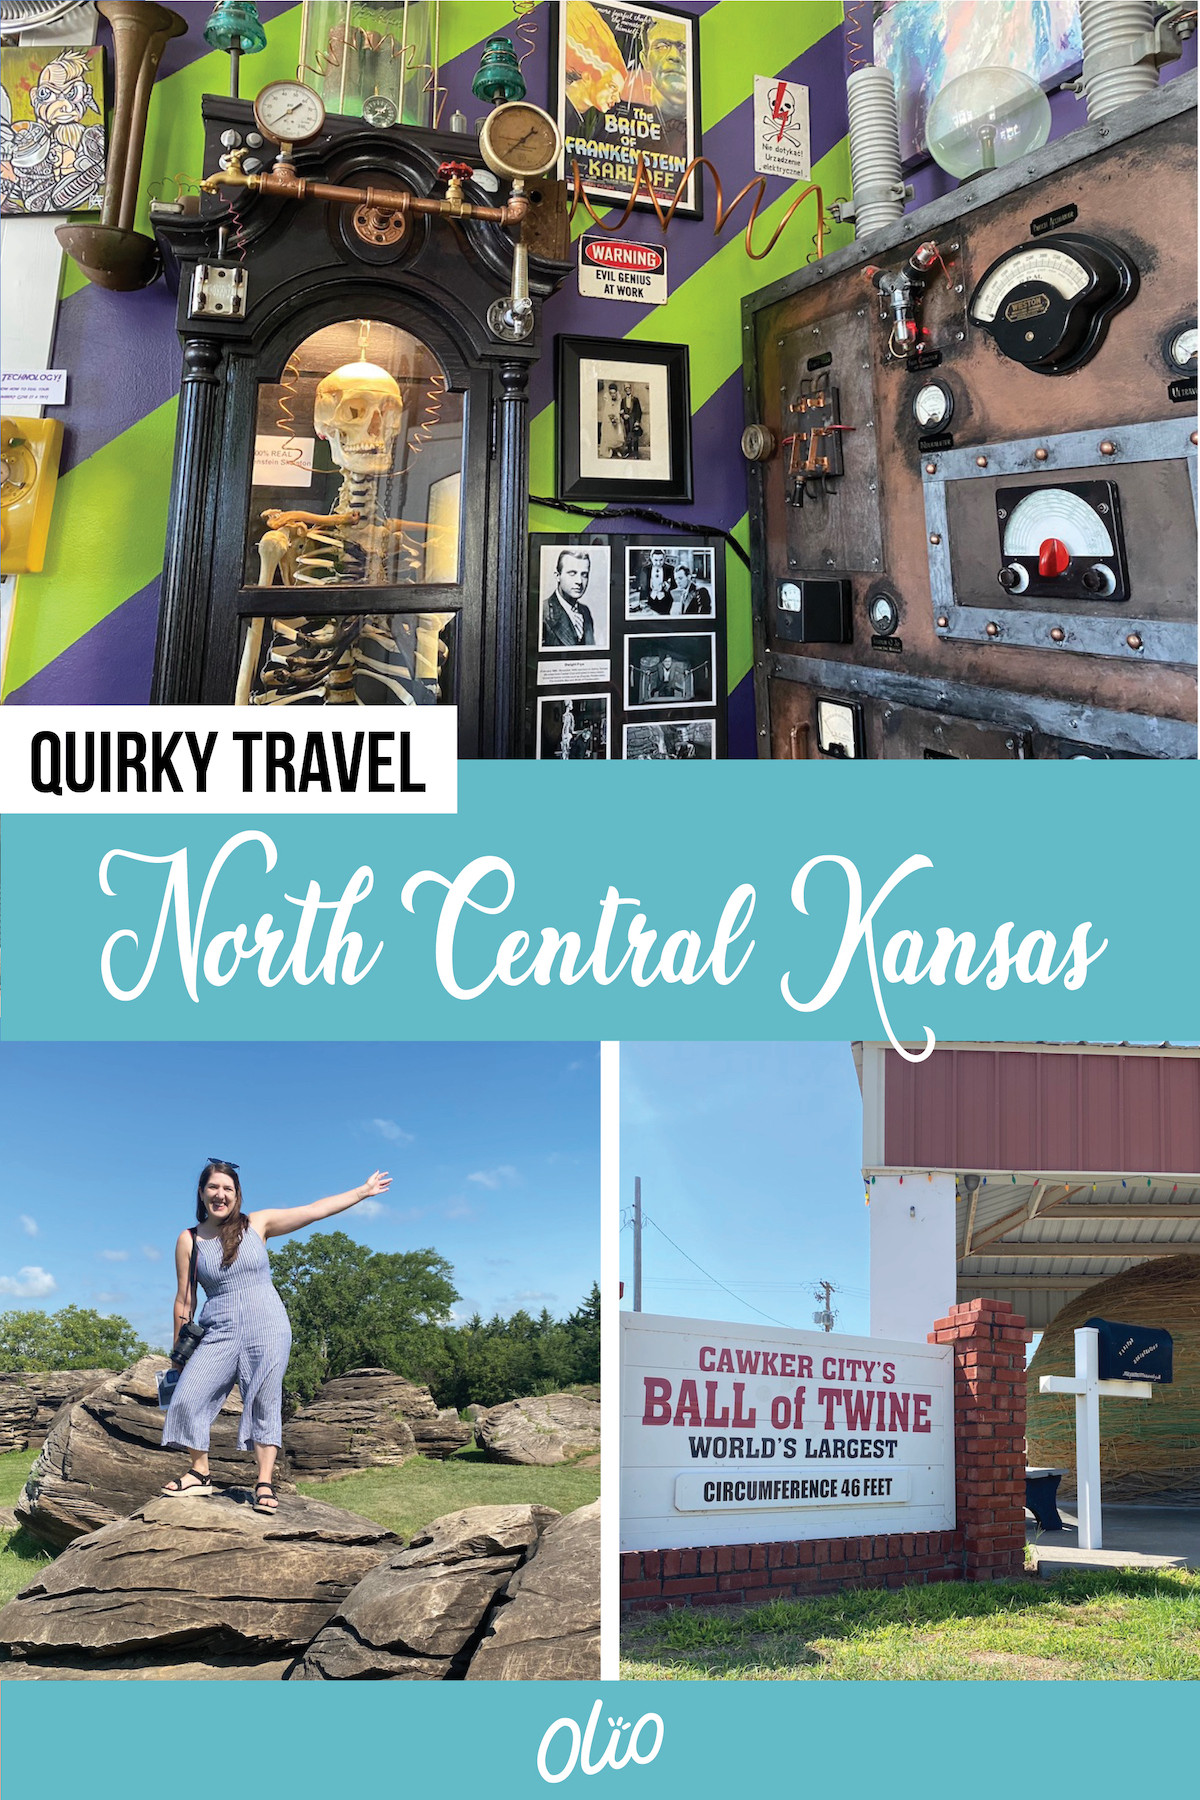 If you like to explore off the beaten path, there is no shortage of things to do in north central Kansas. From historic hotels and natural wonders to roadside attractions and offbeat art installations, this region of Kansas is teeming with quirky places to fill your itinerary. Discover 10+ unique places to add to your to-visit list the next time you're on a Kansas road trip!